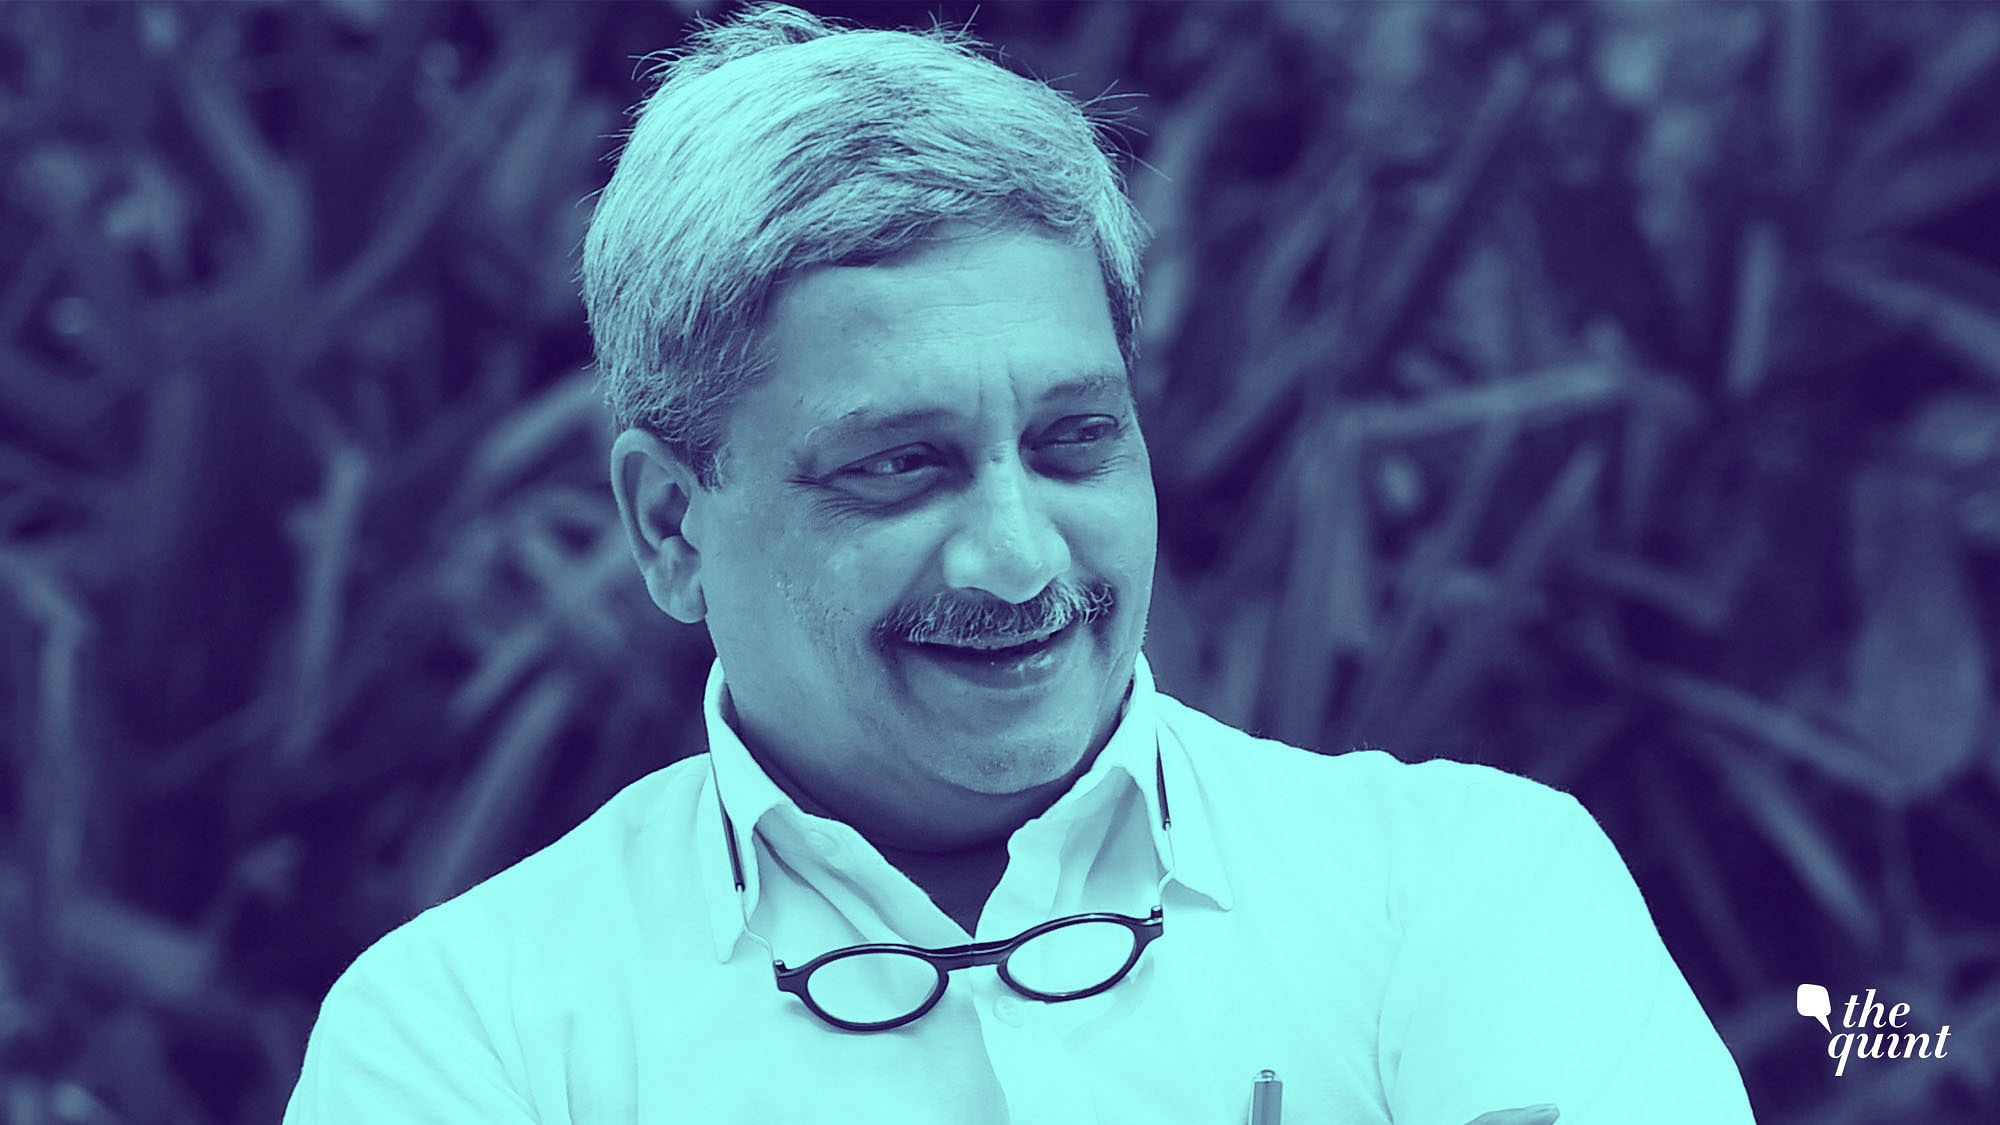 The last rites of Manohar Parrikar will be performed at 5 pm, at the Miramar beach.